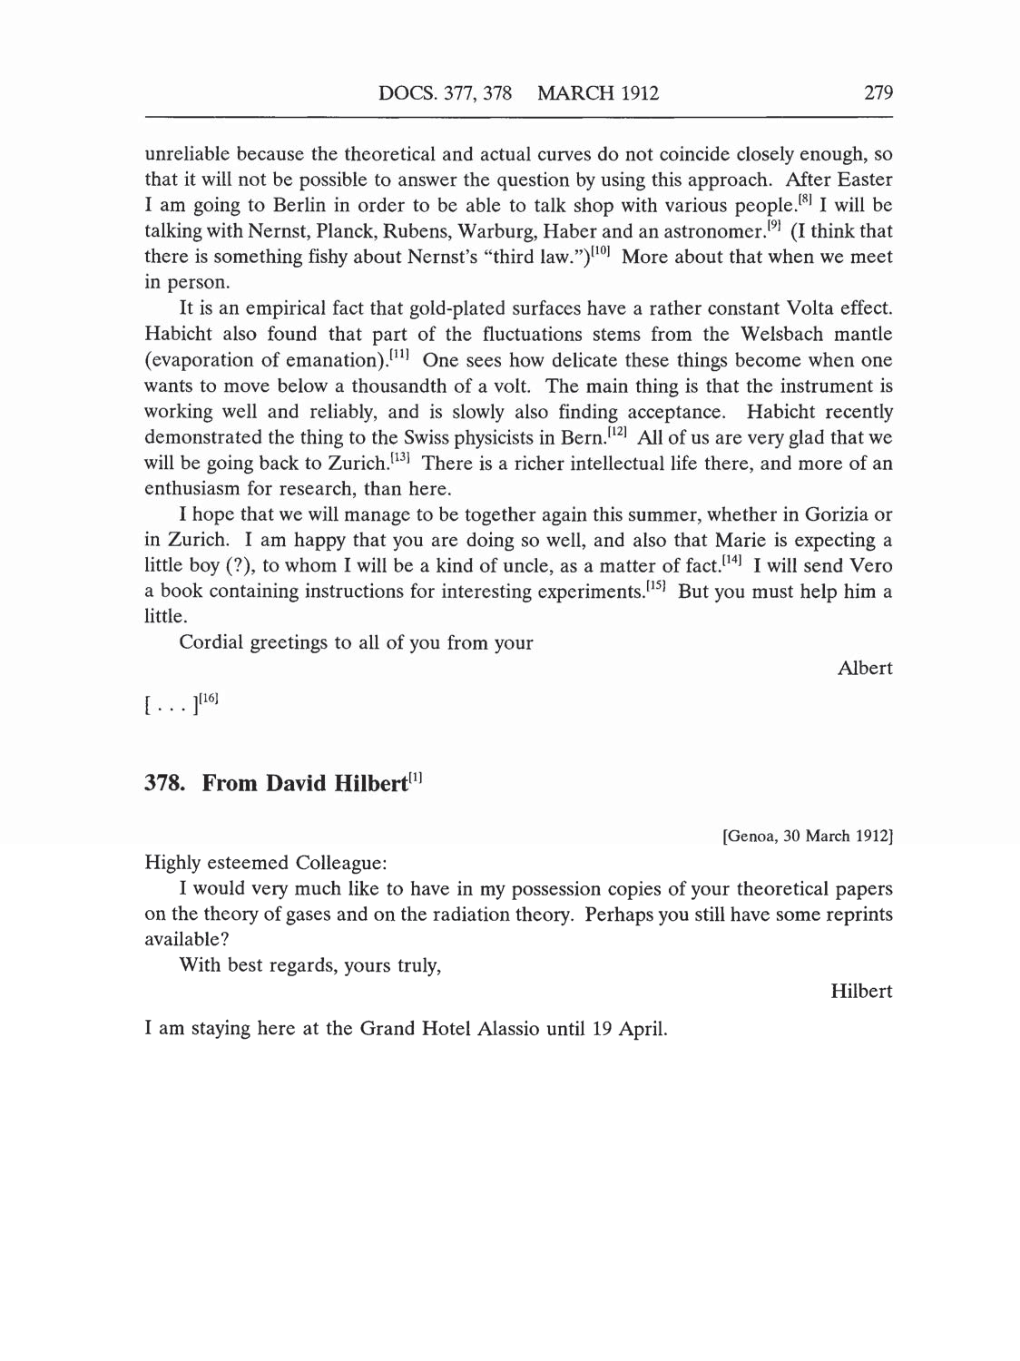 Volume 5: The Swiss Years: Correspondence, 1902-1914 (English translation supplement) page 279